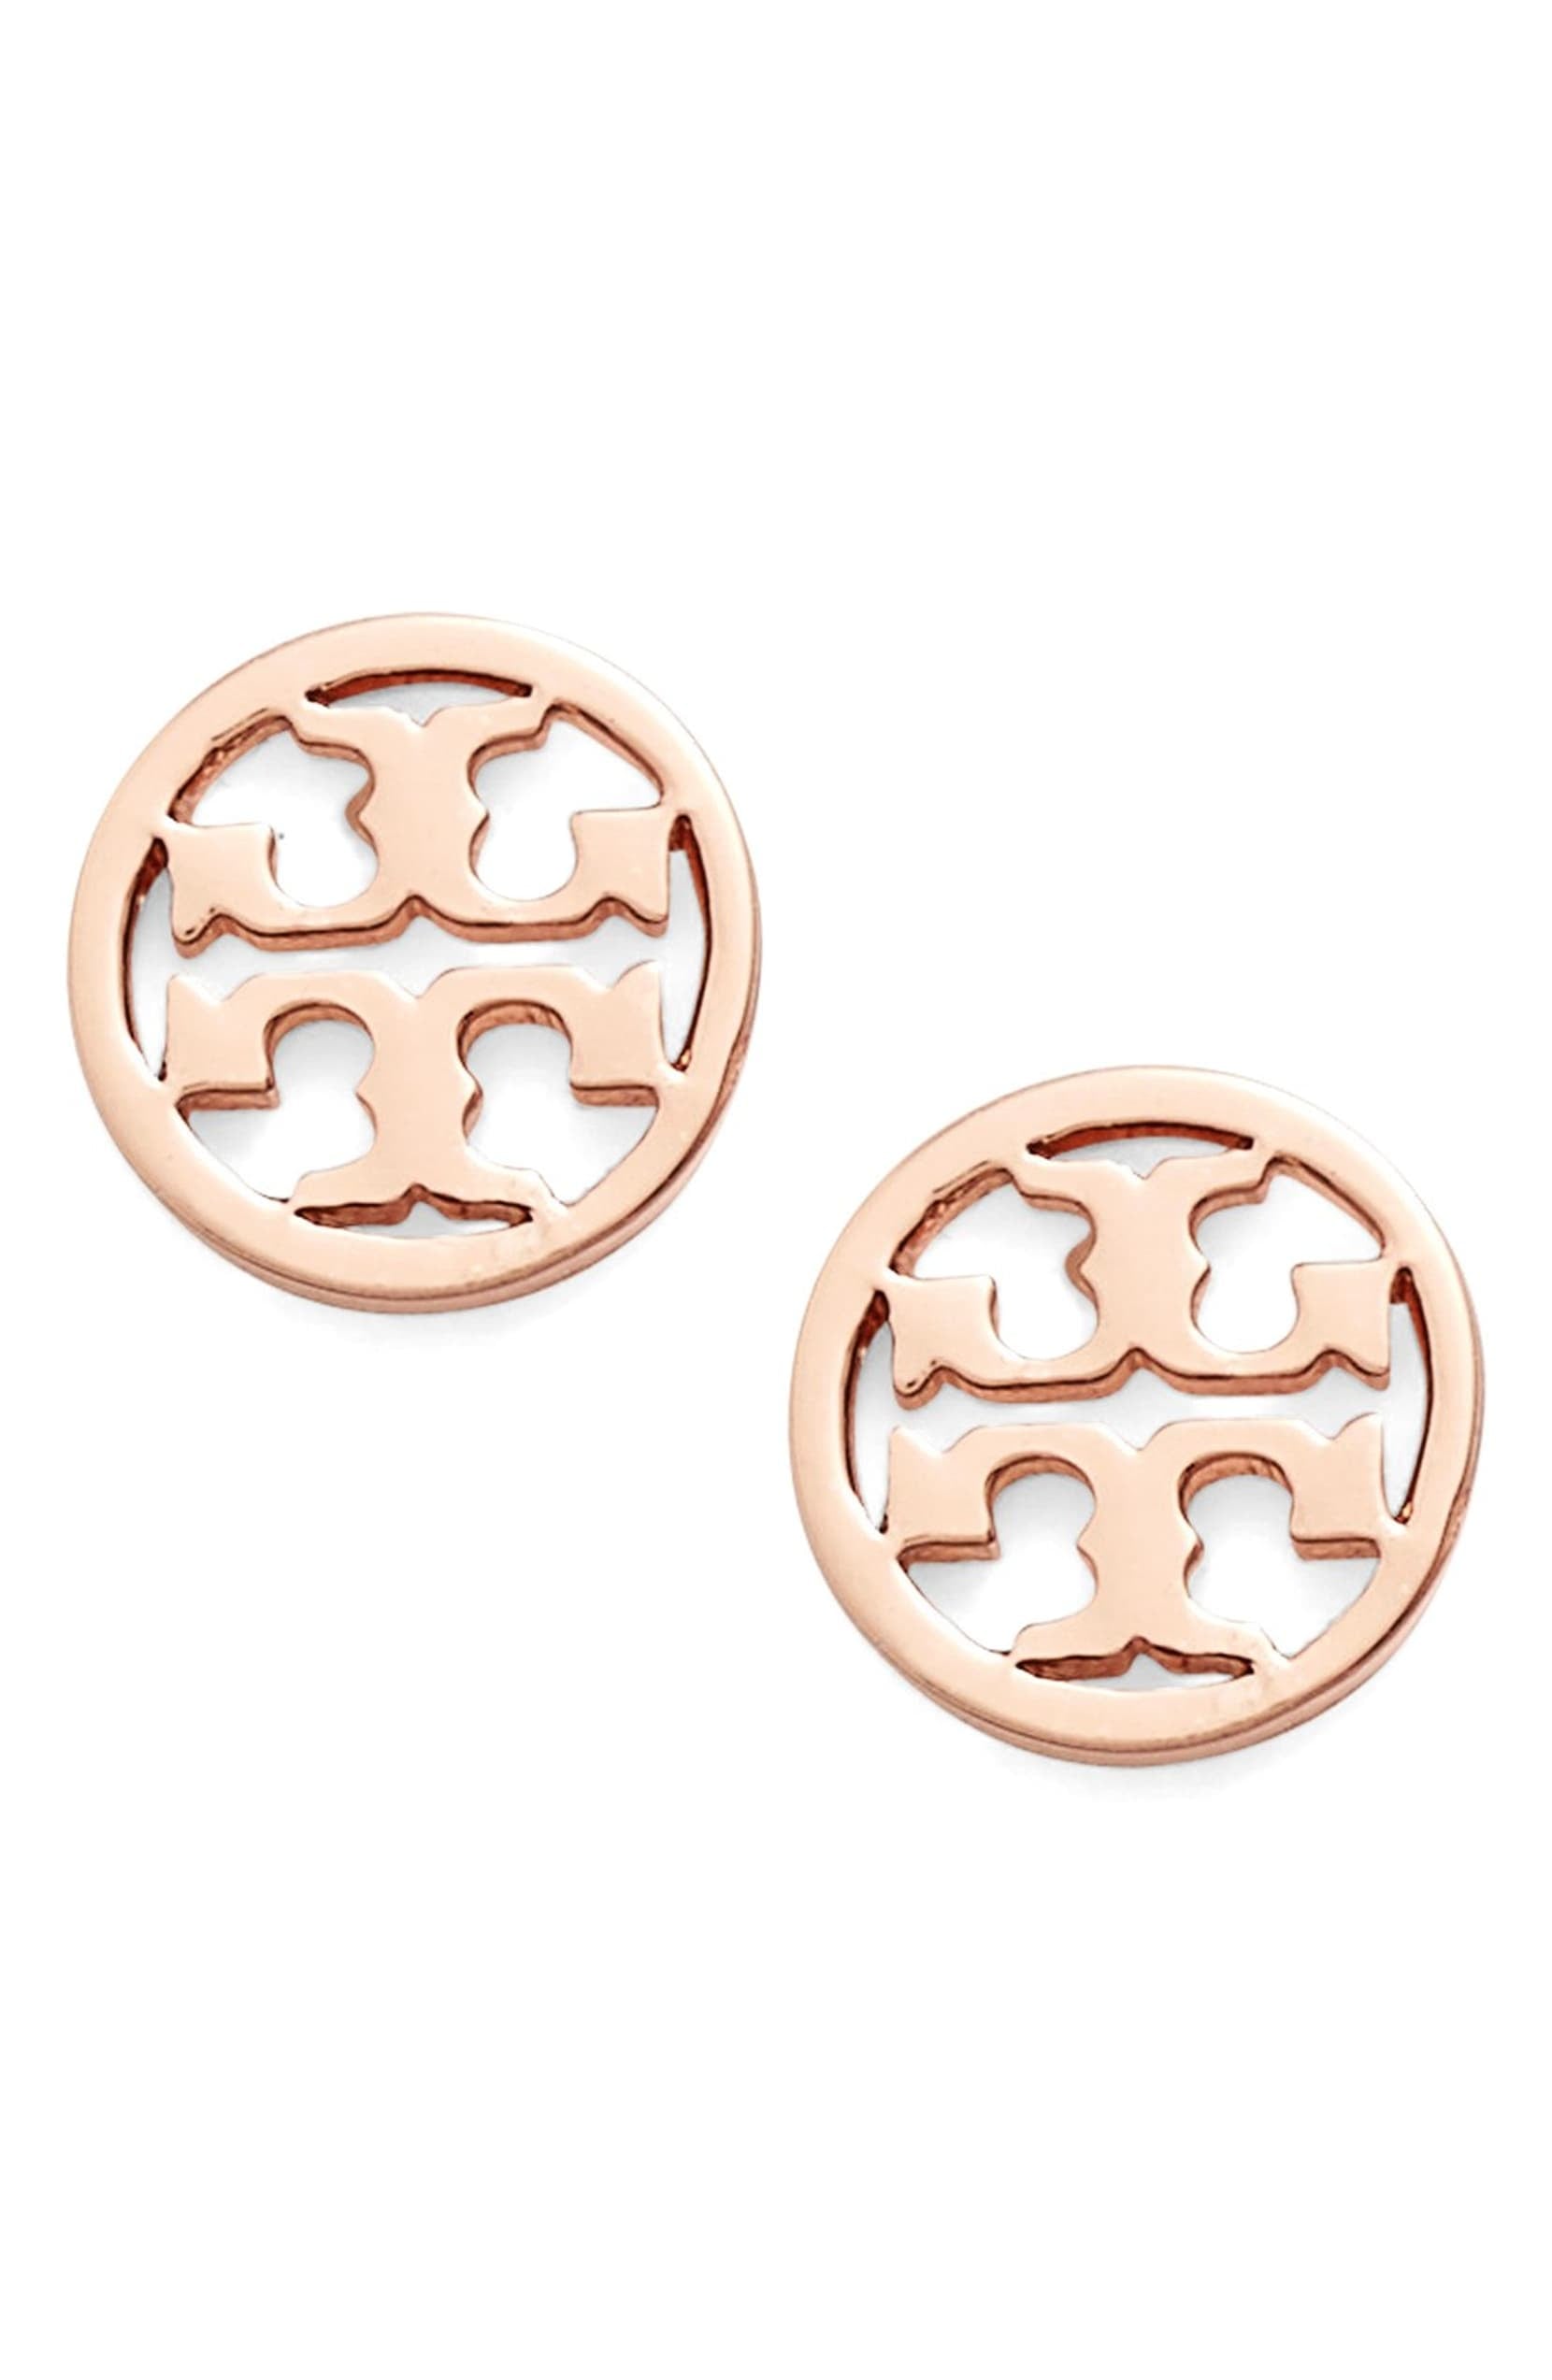 Tory Burch Circle Logo Stud Earrings | 100+ Stylish Gifts That Will Make  Your Friends Feel More Special Than Ever | POPSUGAR Fashion Photo 33